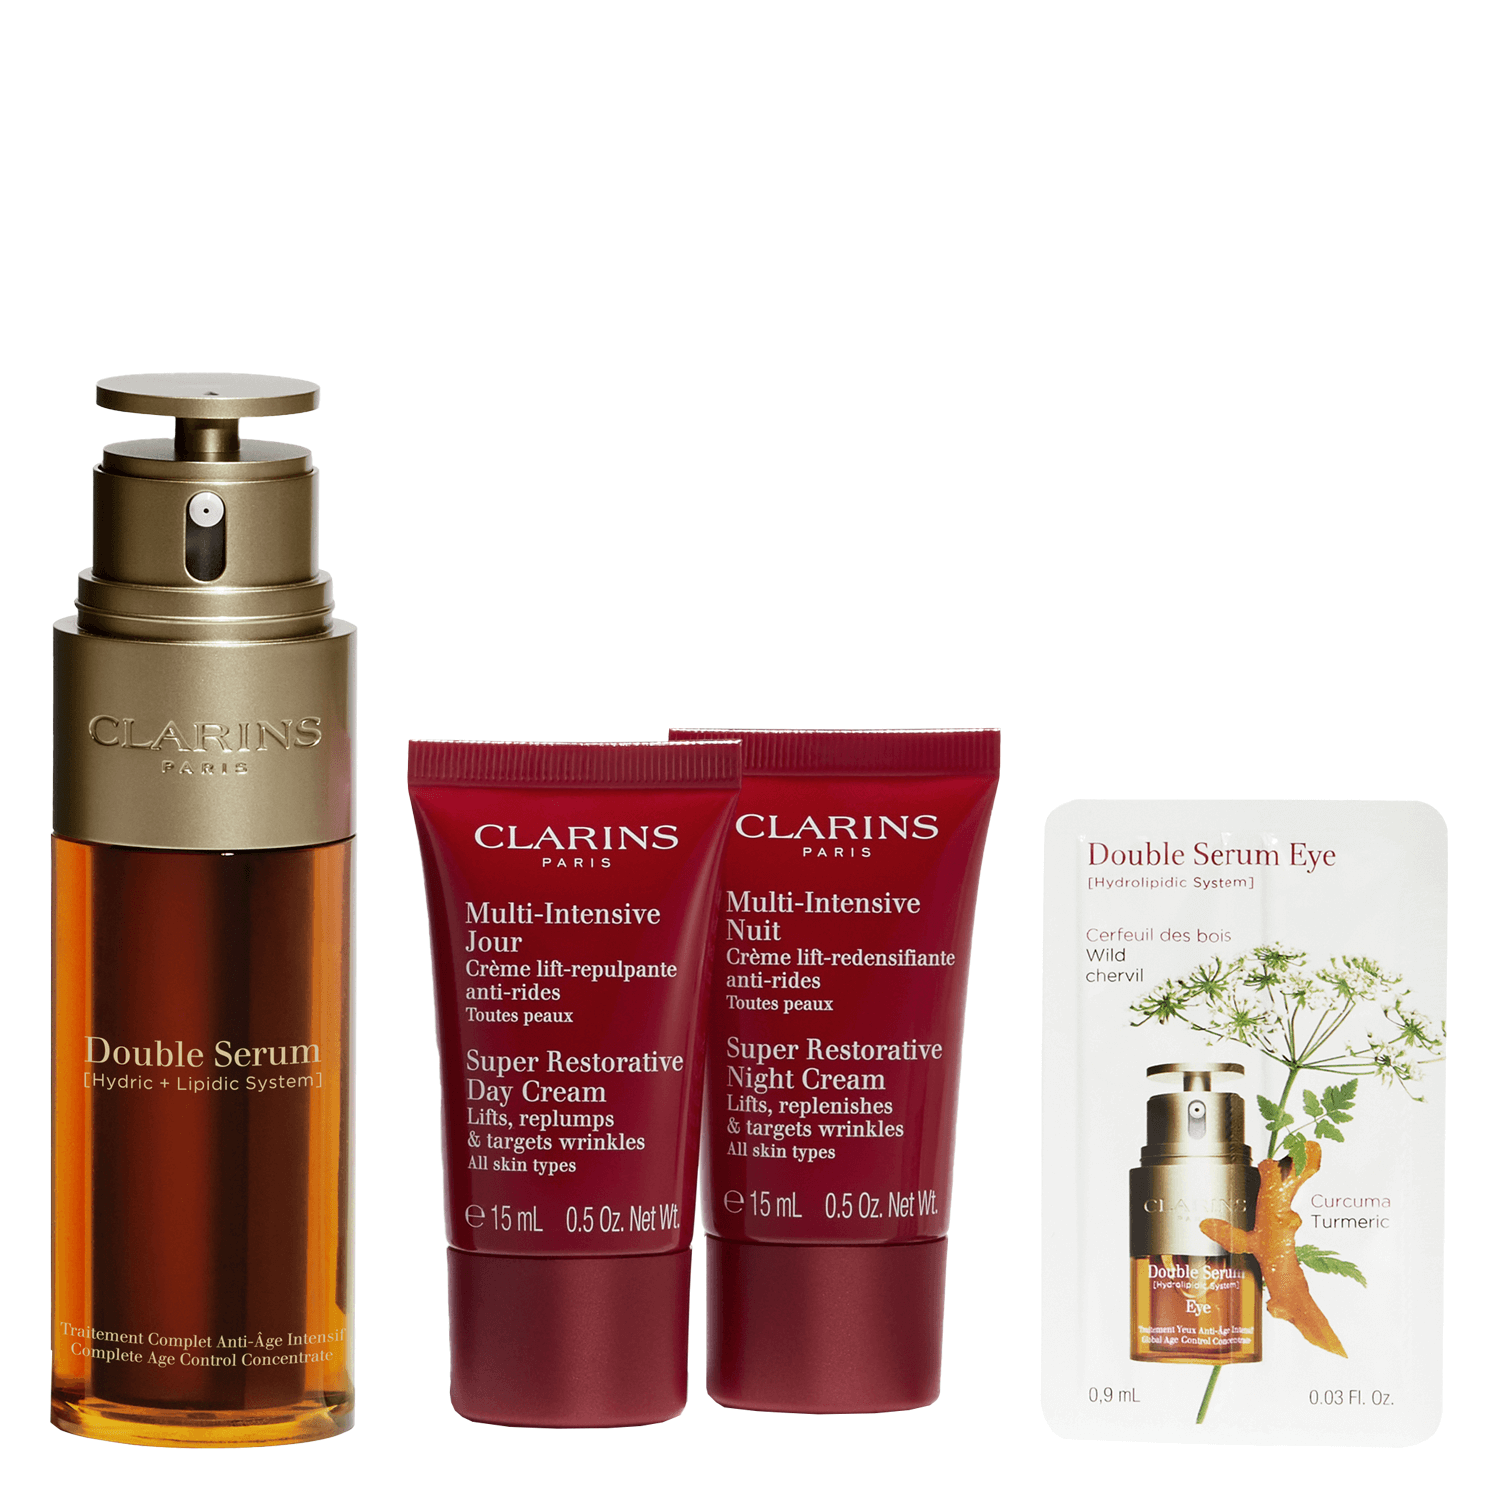 Product image from Clarins Specials - Double Serum & Multi-Intensive